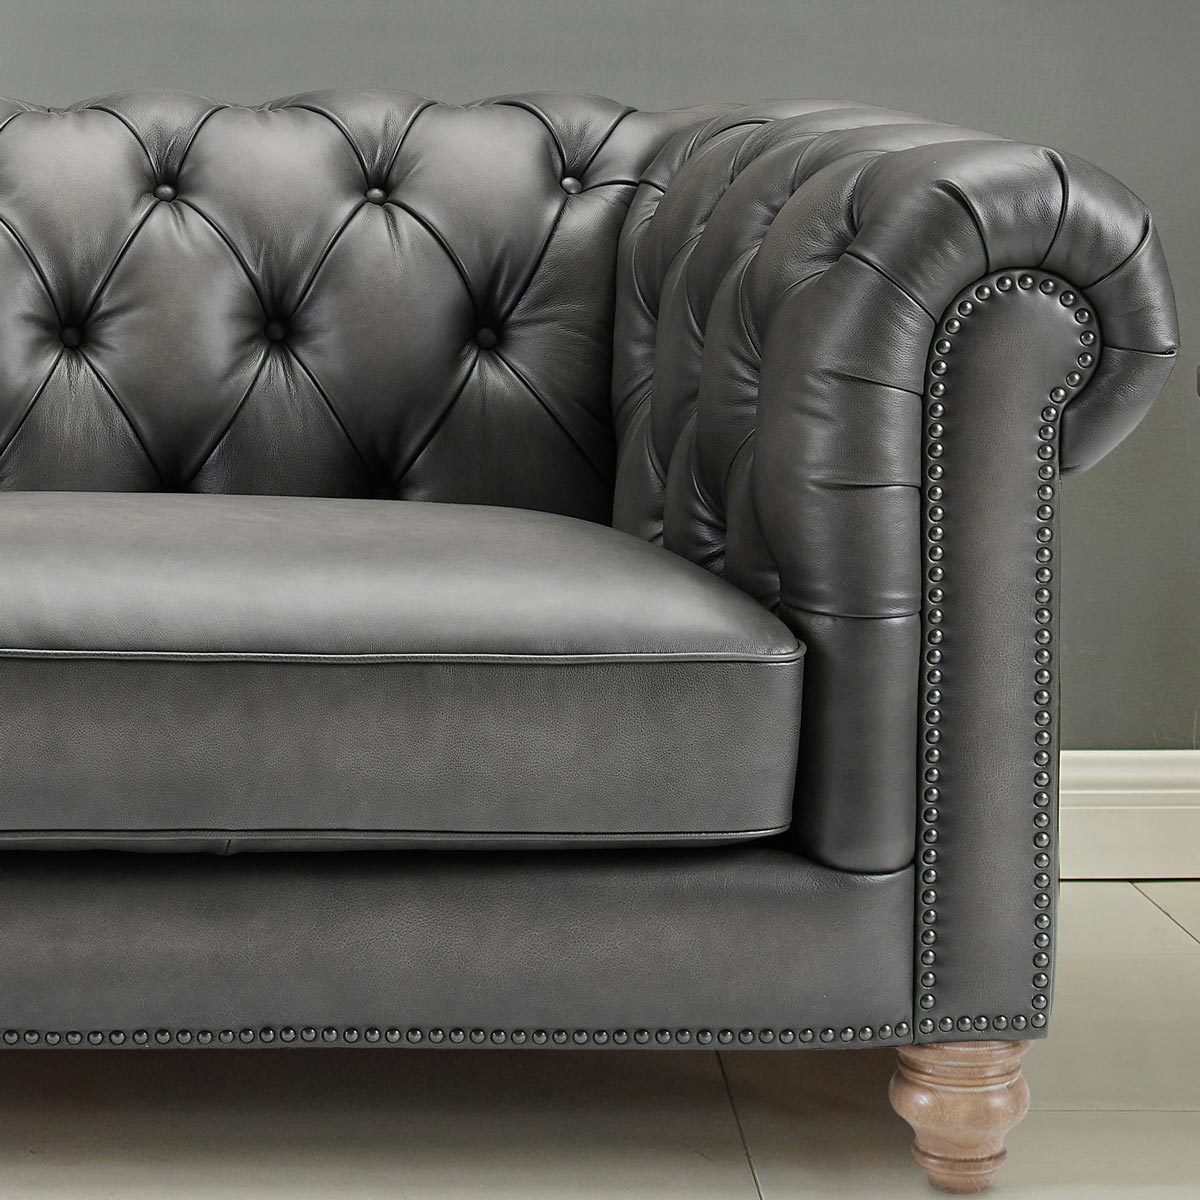 Allington 2 Seater Grey Leather Chesterfield Sofa - Signature Retail Stores